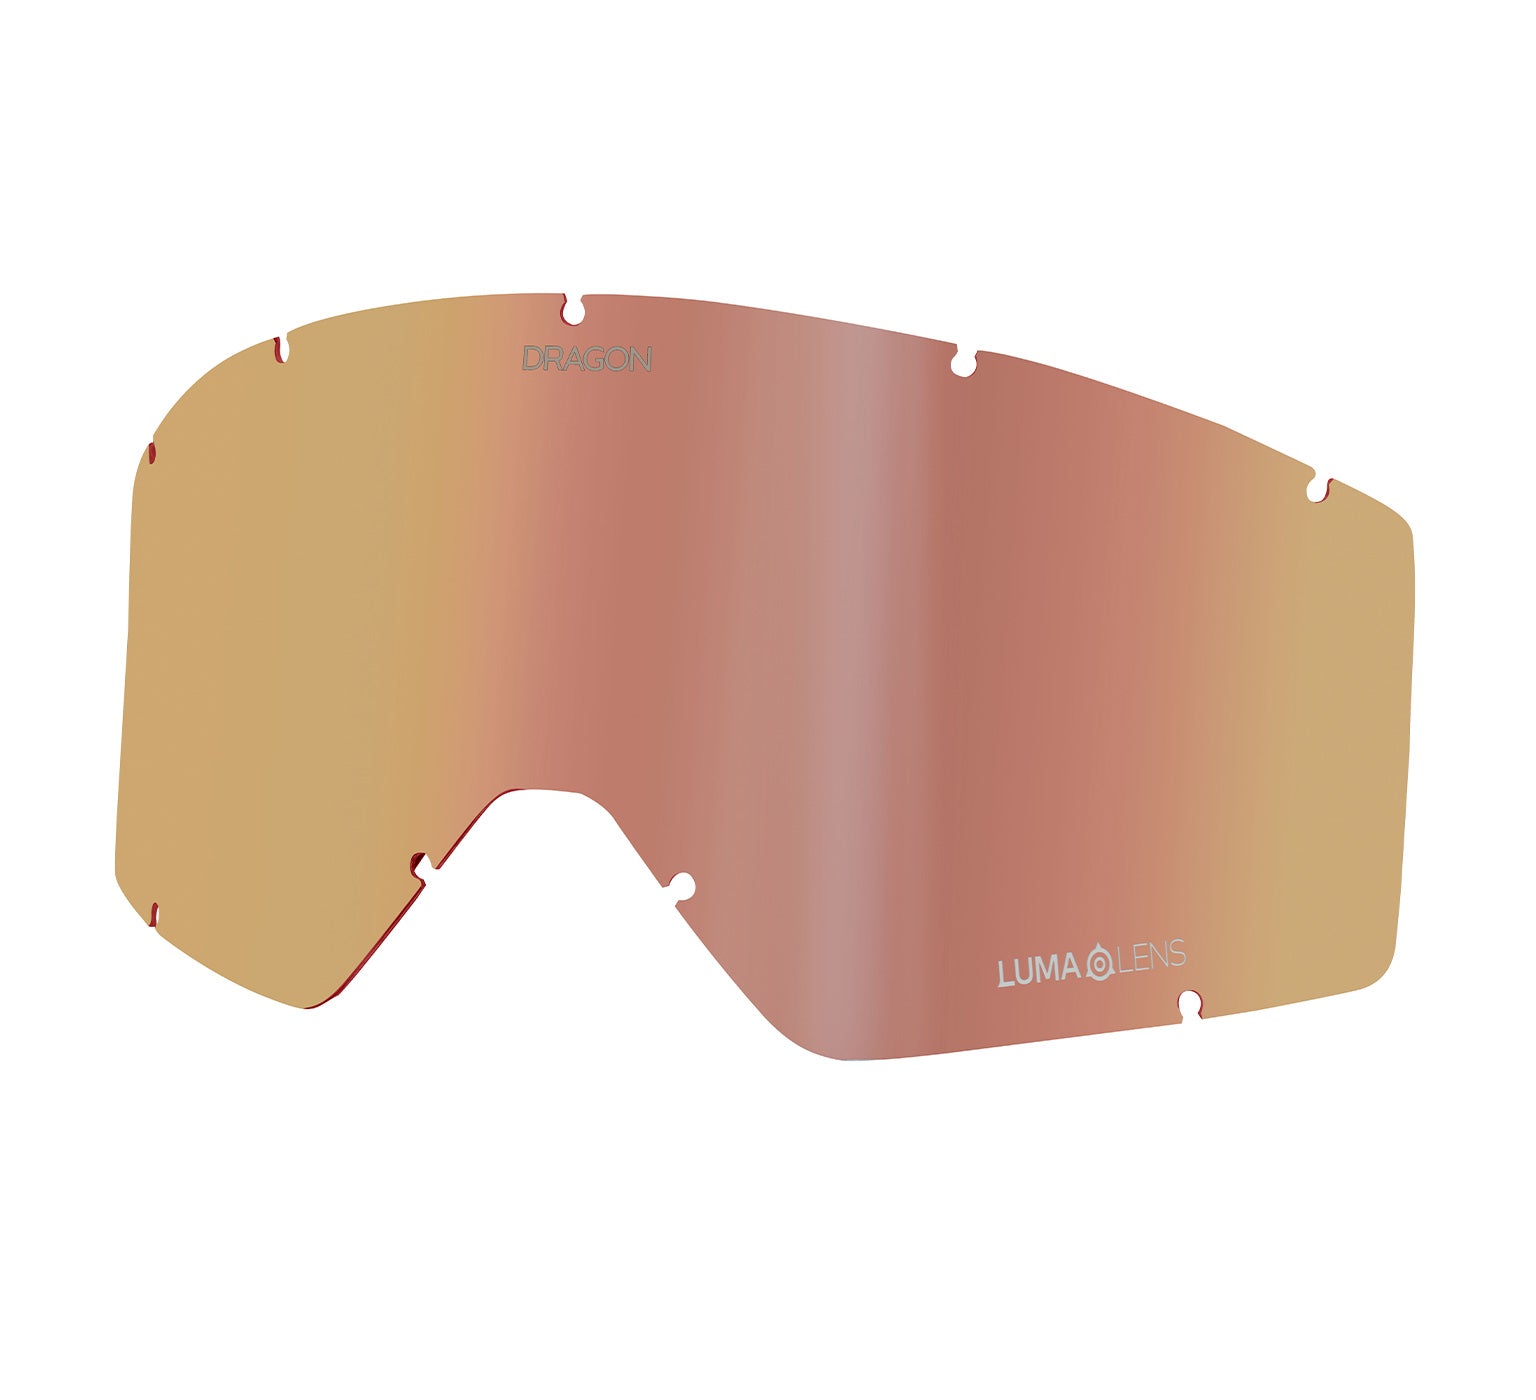 DX3 L OTG Replacement Lens - Lumalens Rose Gold Ionized